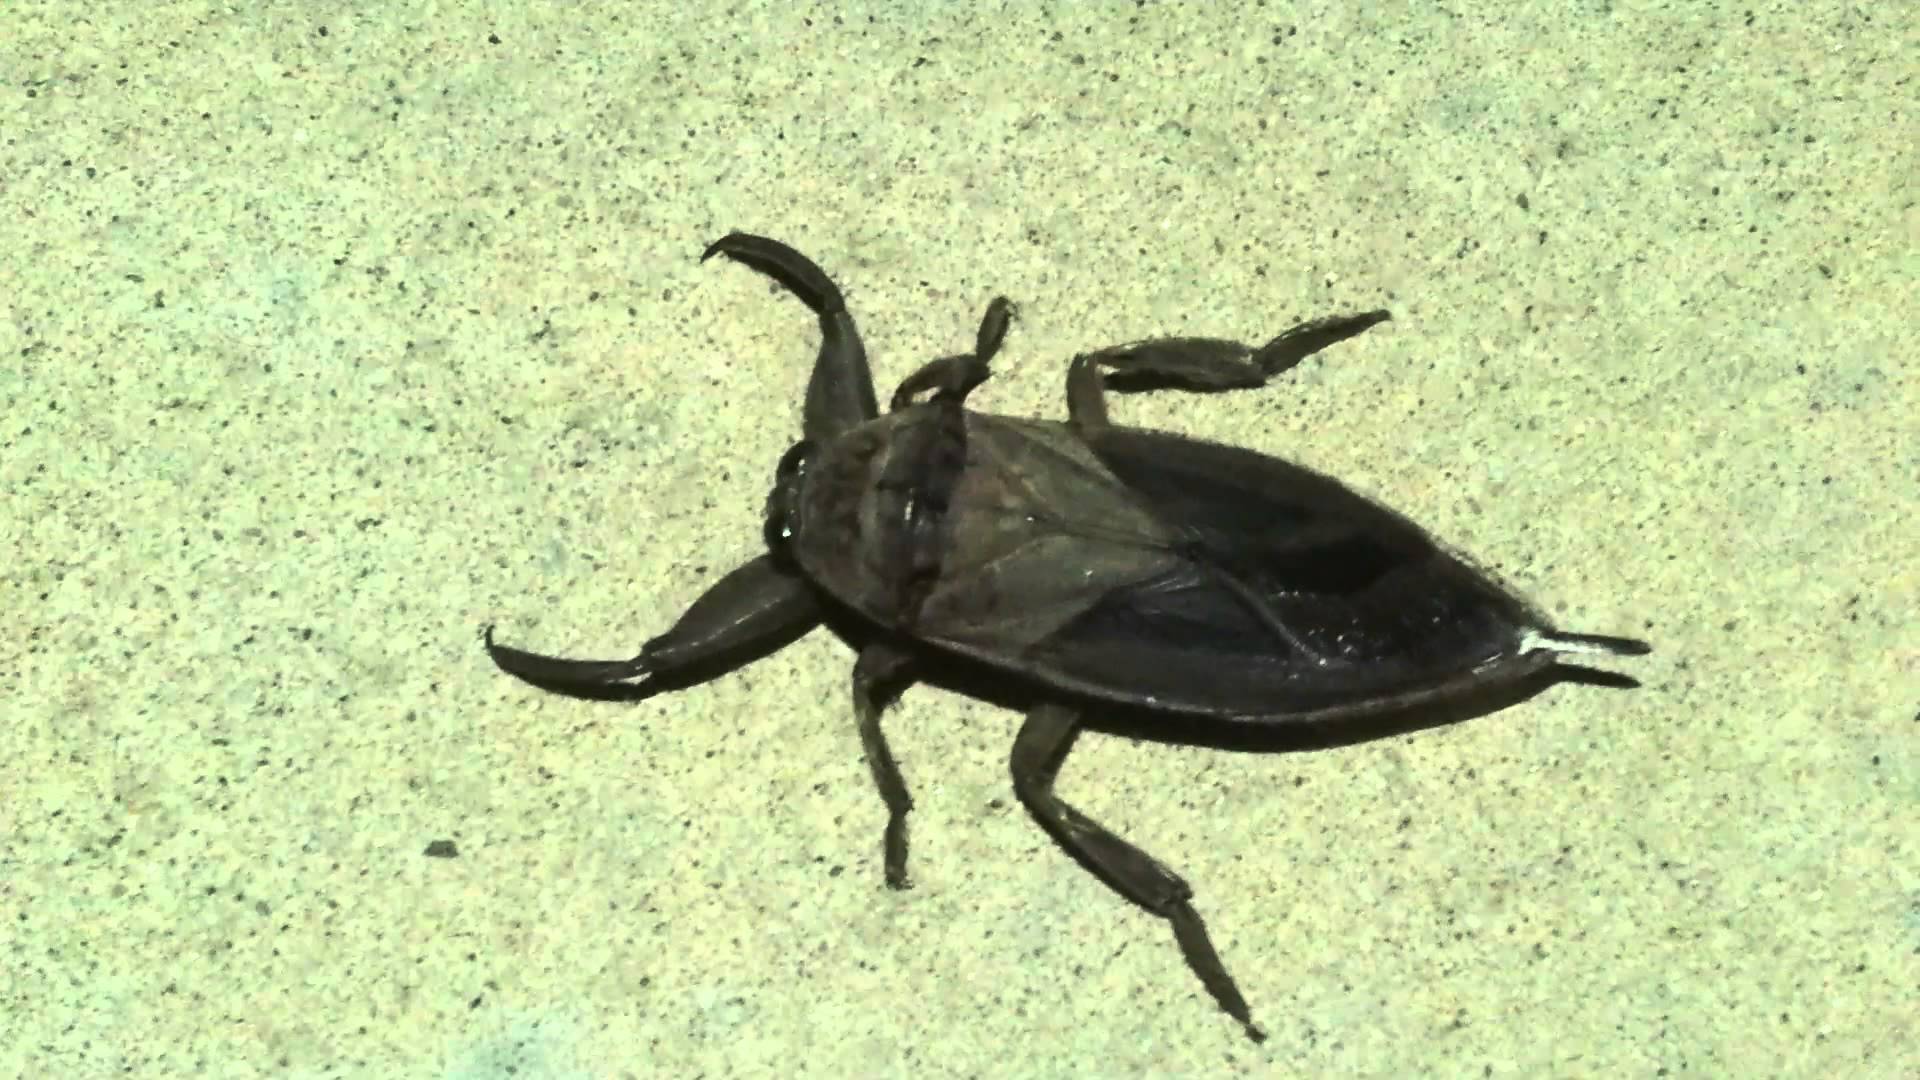 Flying Bugs That Look Like Roaches